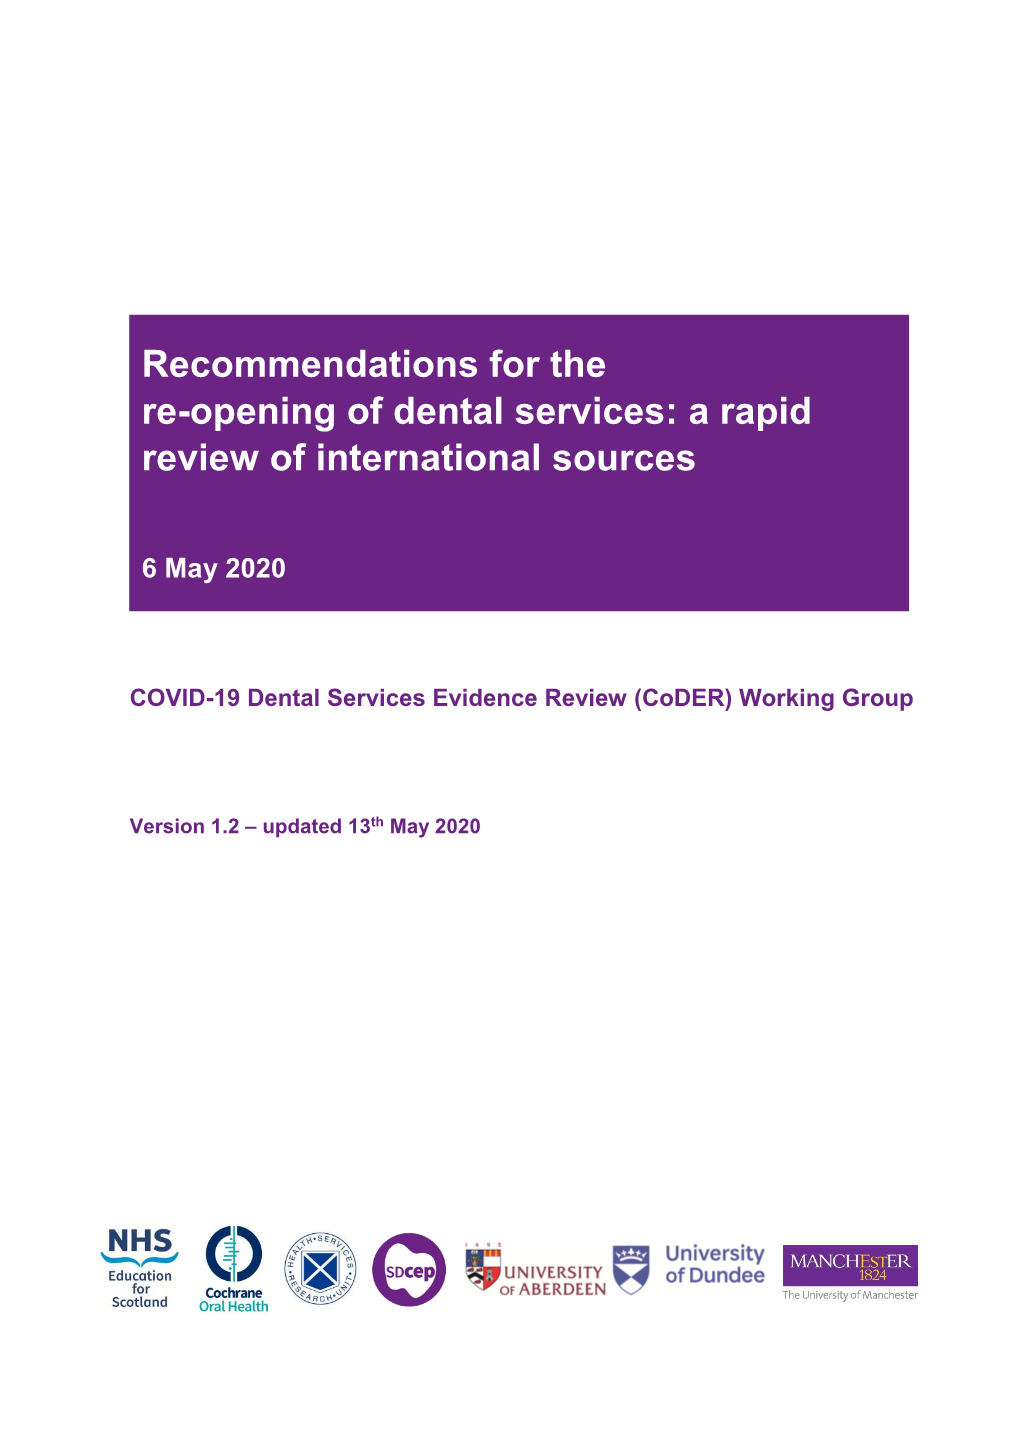 Recommendations for the Re-Opening of Dental Services: a Rapid Review of International Sources